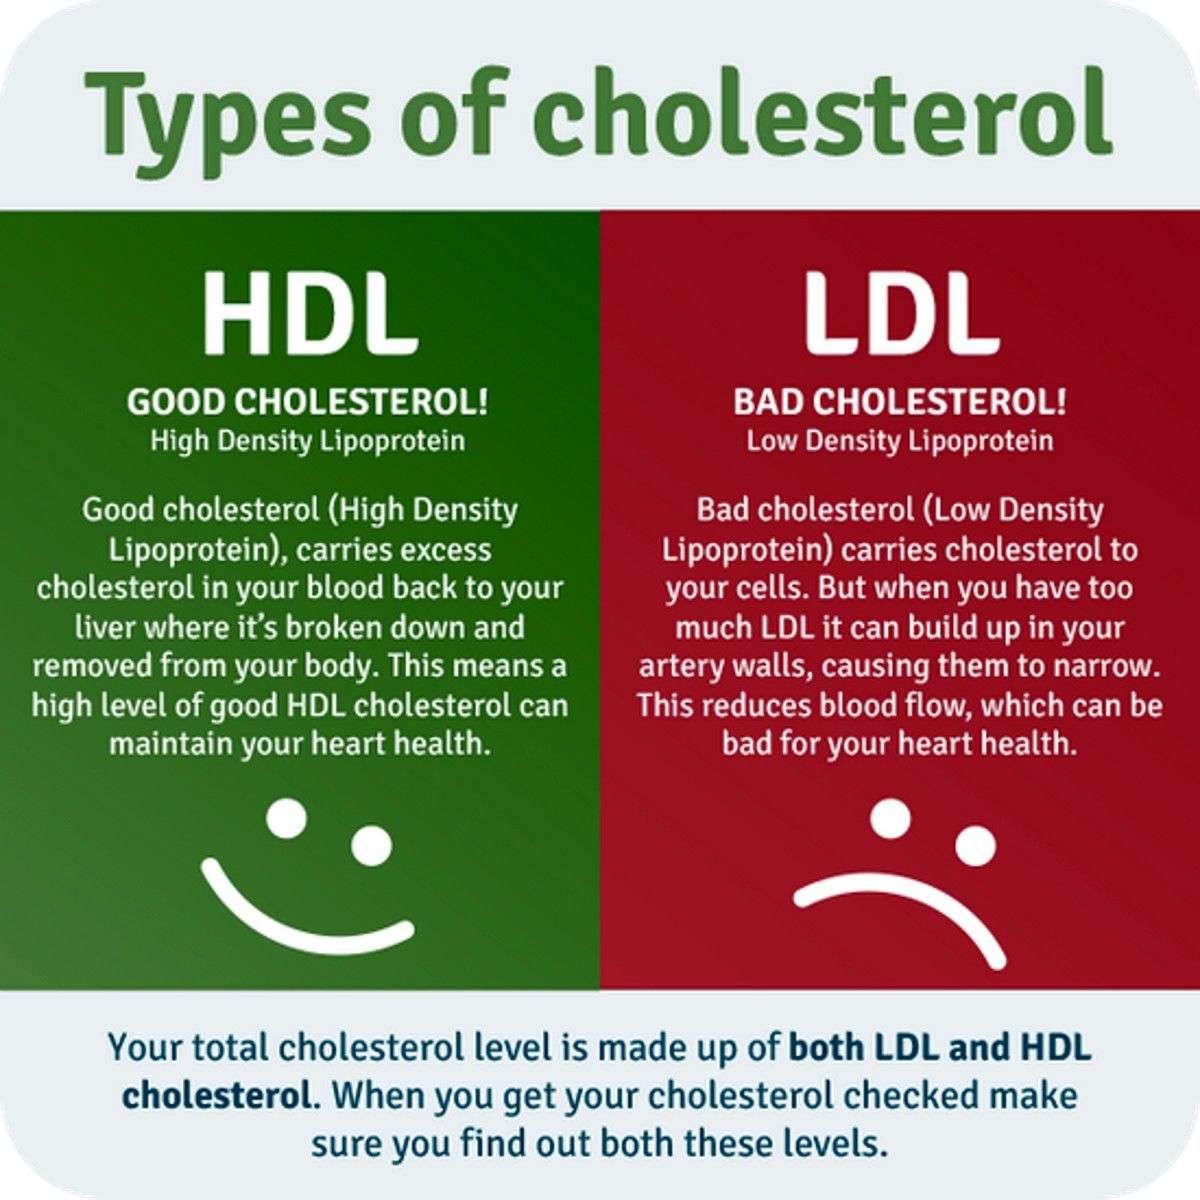 Know you good and your bad fats.... HDL plant based fats, vs LDL animal ...